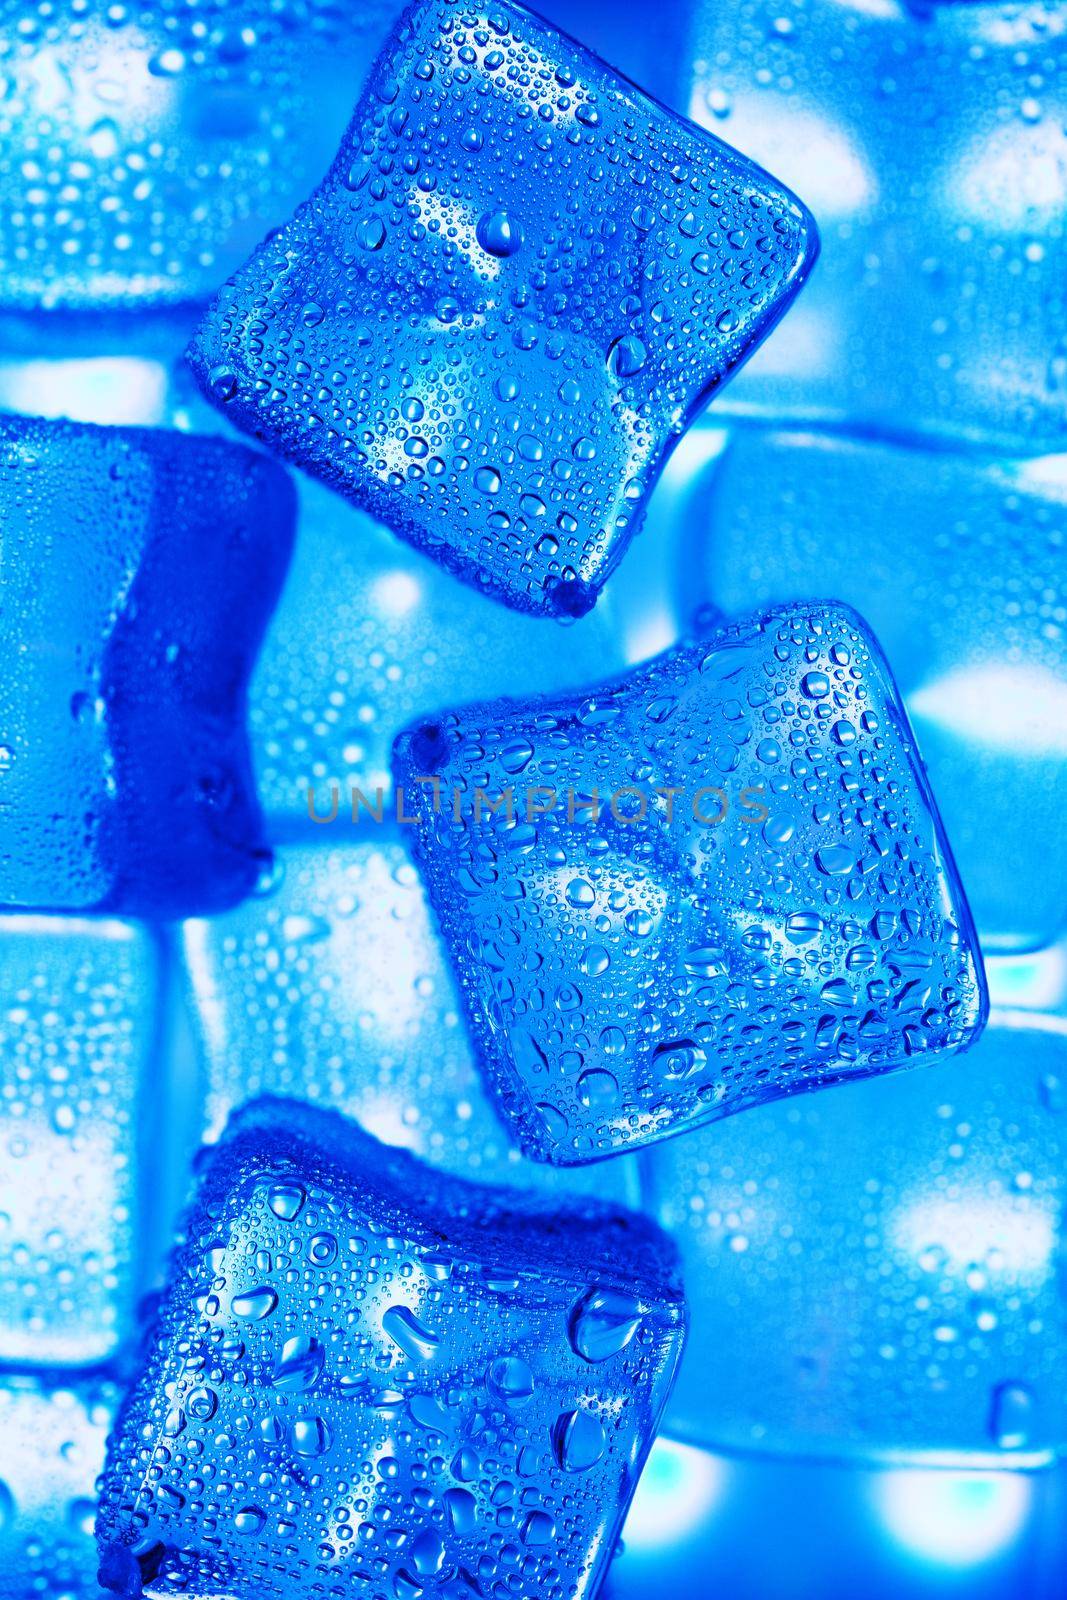 Ice cubes with blue backlight in the freezer close-up in full screen selective focus